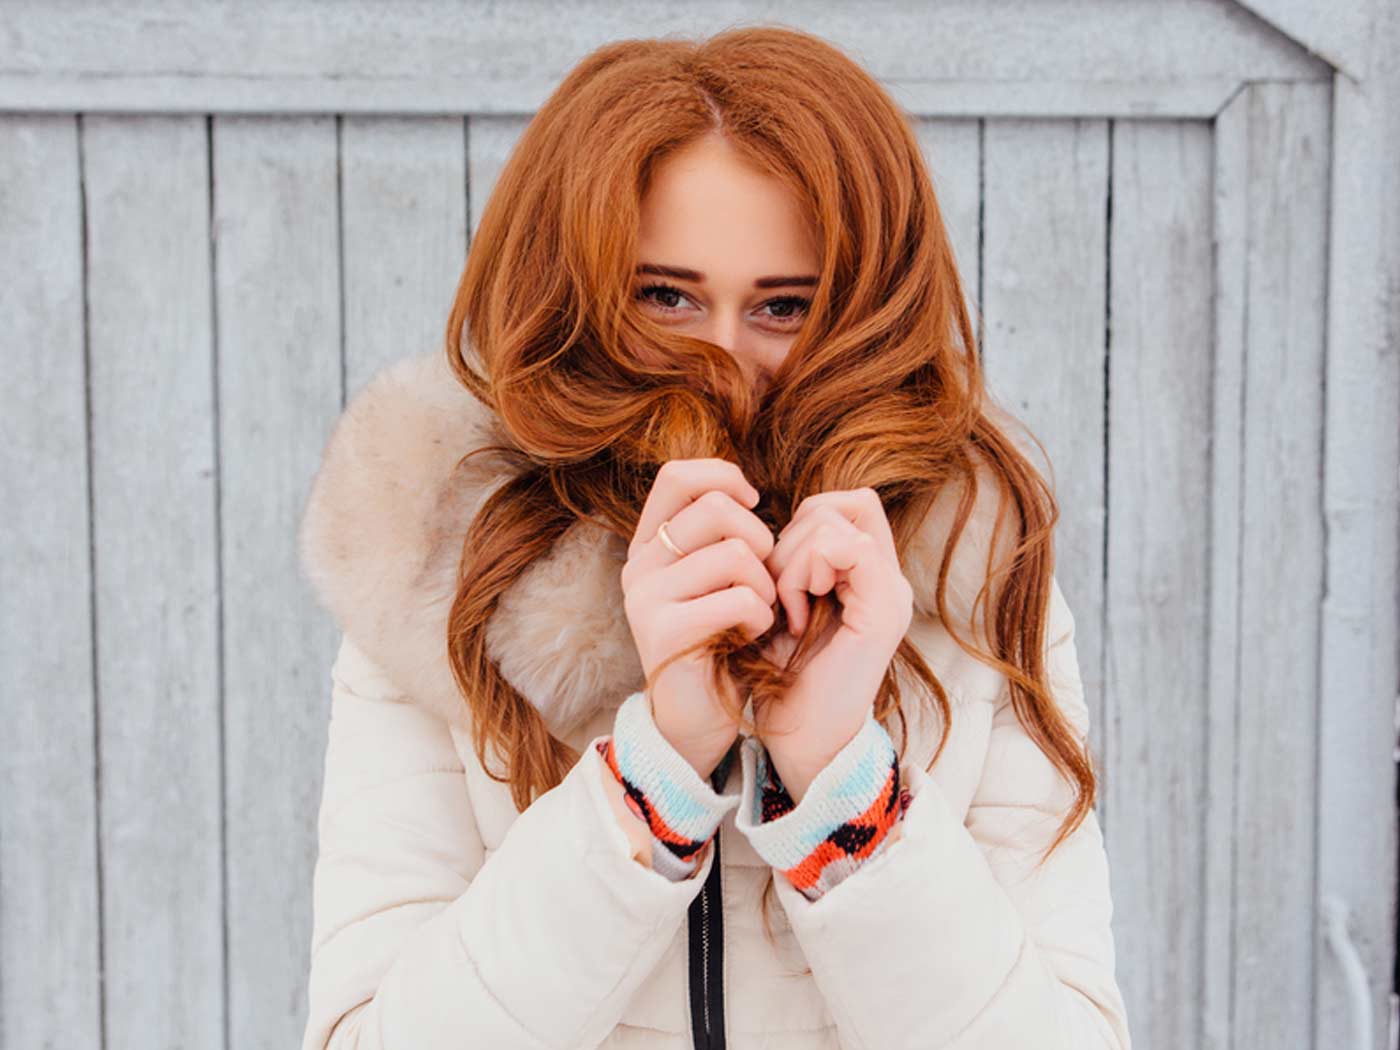 Winter Hair Care Tips